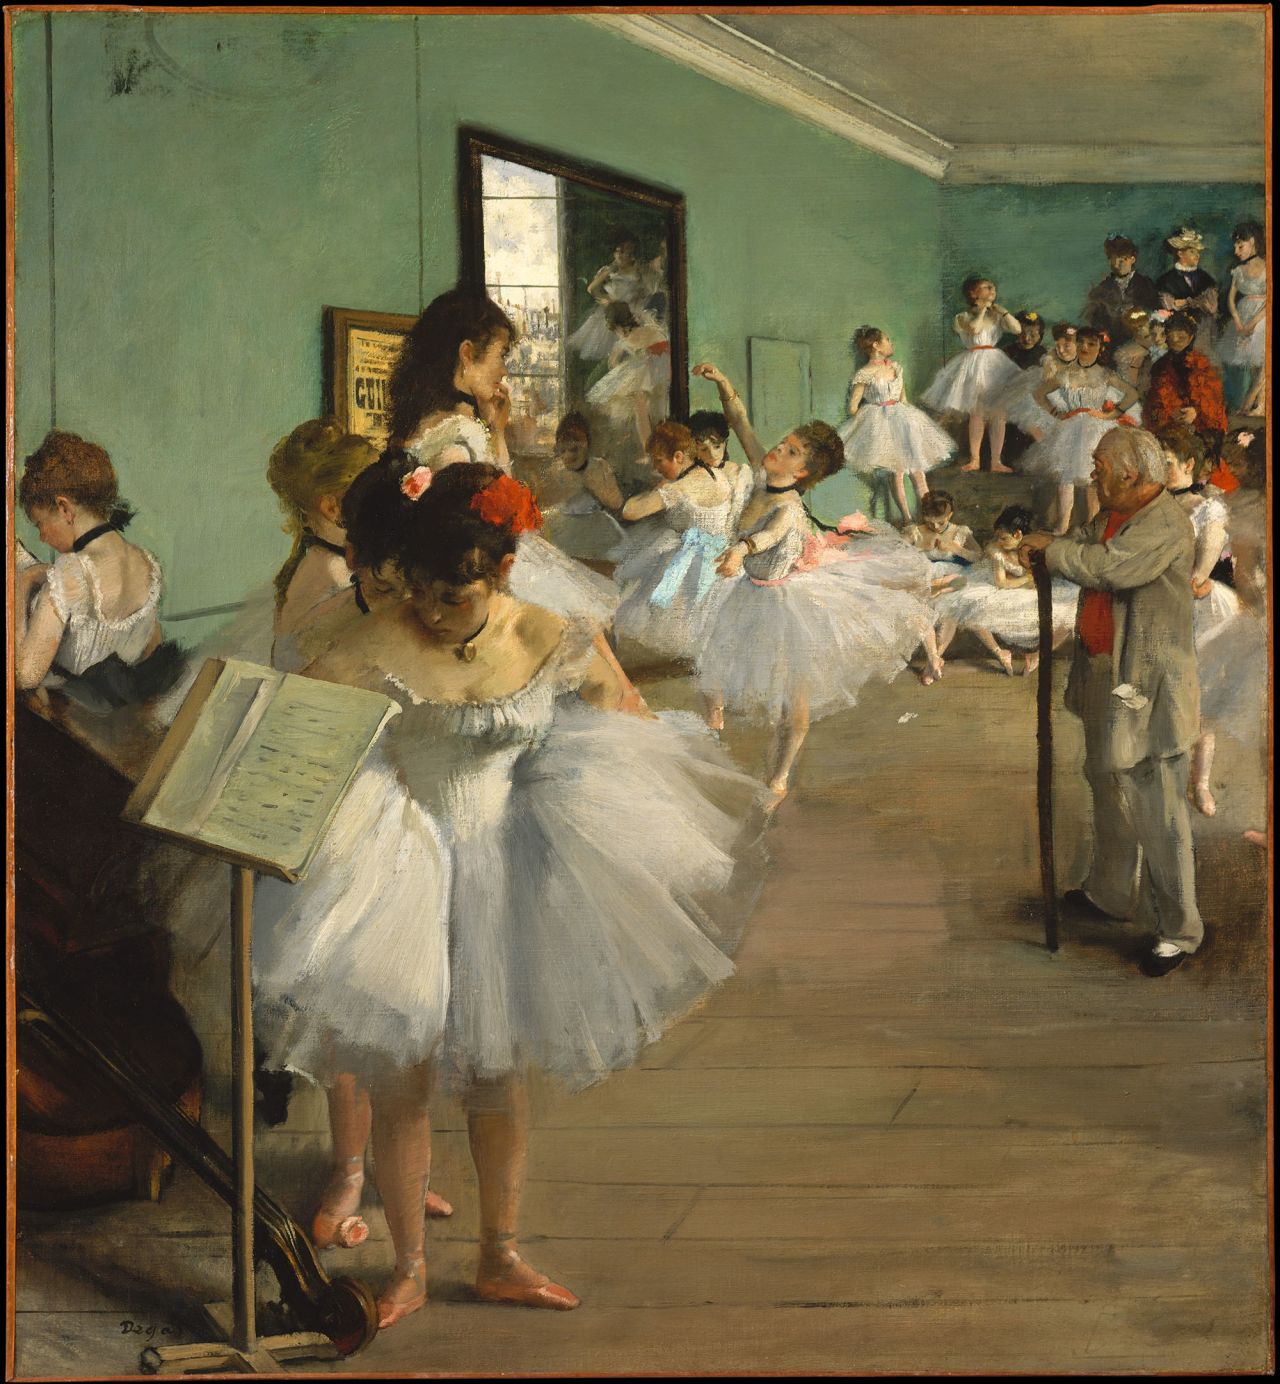 Degas made around 1,500 paintings, monotypes and drawings of ballet dancers, but they have a troubled history.